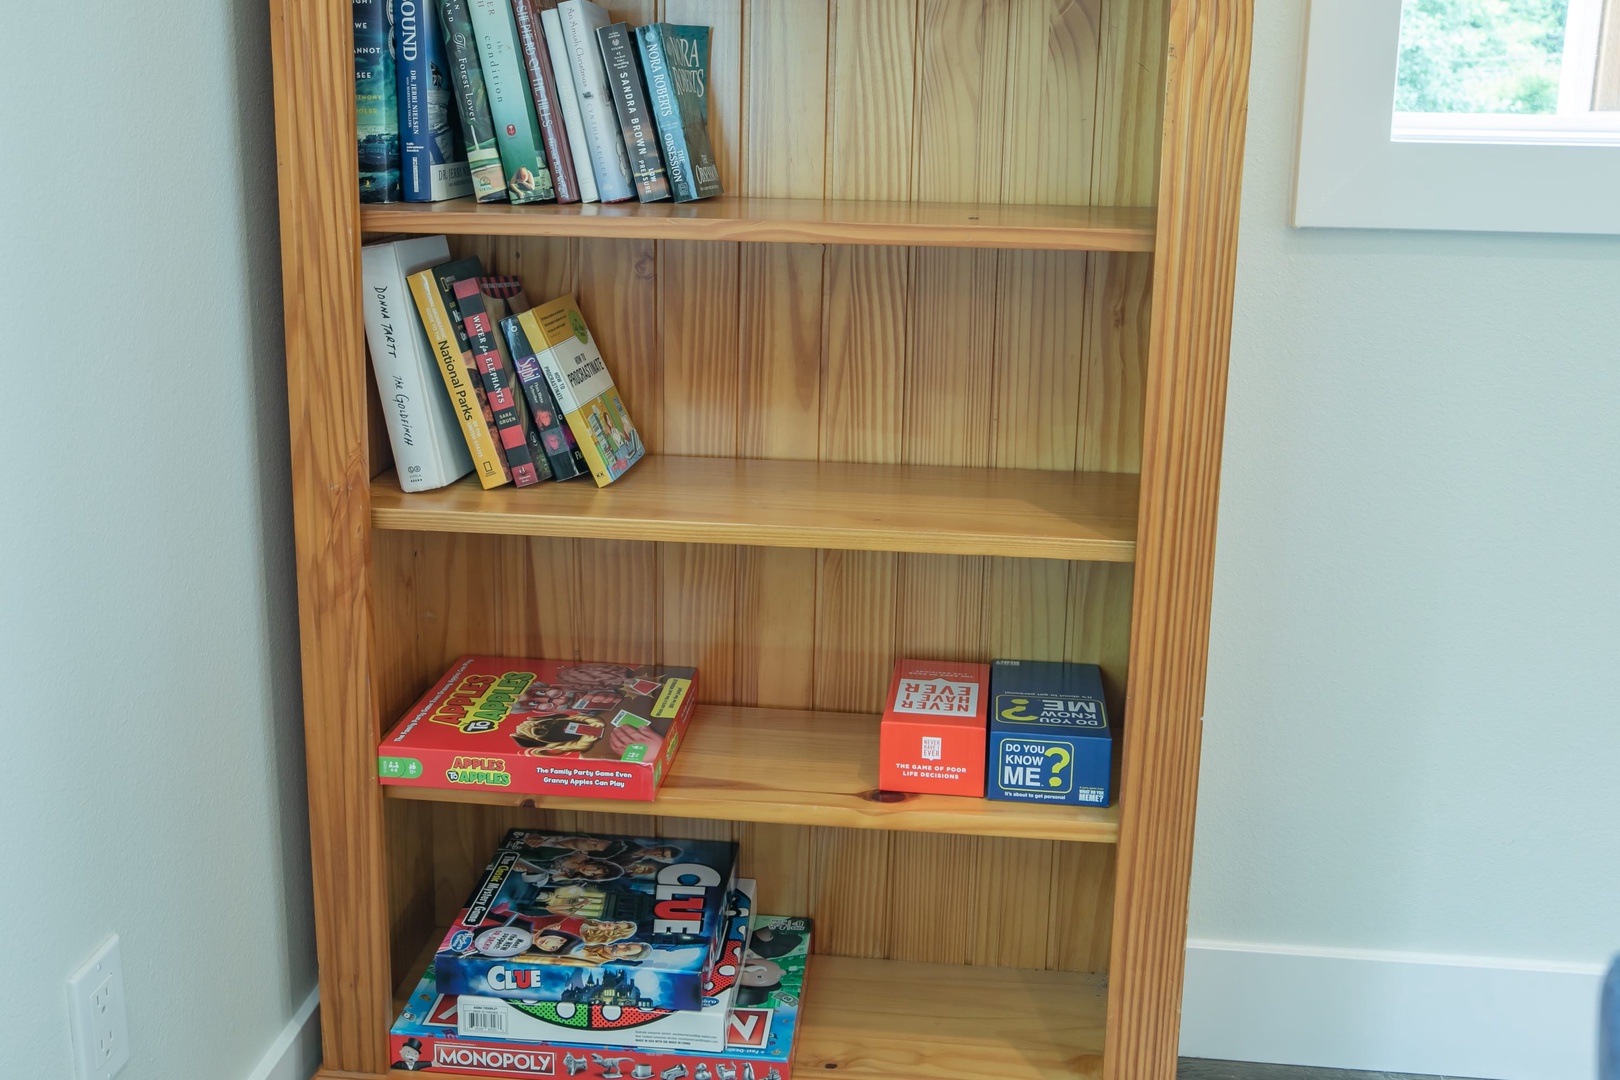 Nehalem Vacation Rentals, Nehalem Coastal Oasis - No chance you'll get bored since the house is filled with Games and Books